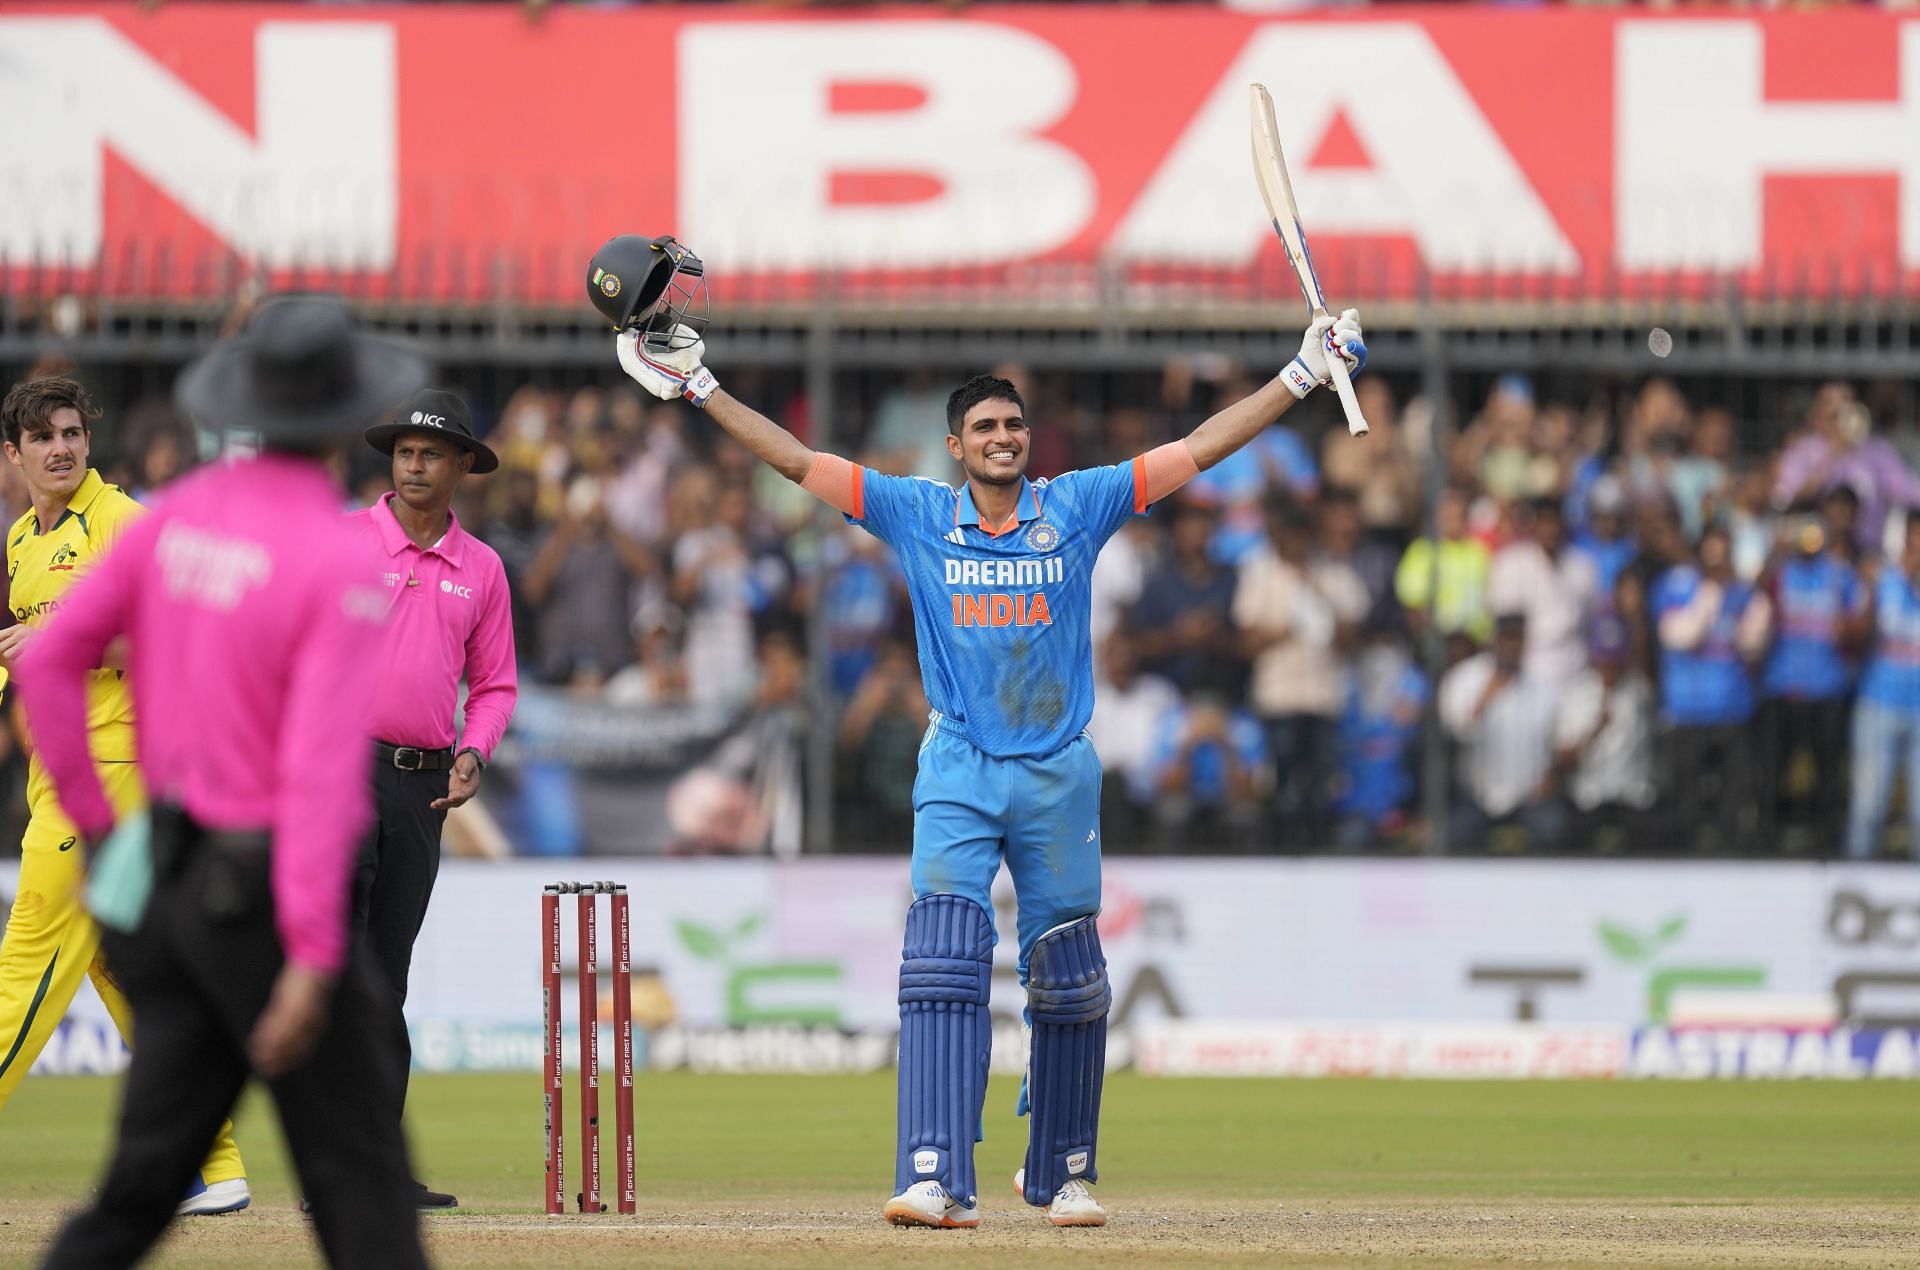 Shubman Gill raising his bat after a ton [Getty Images]